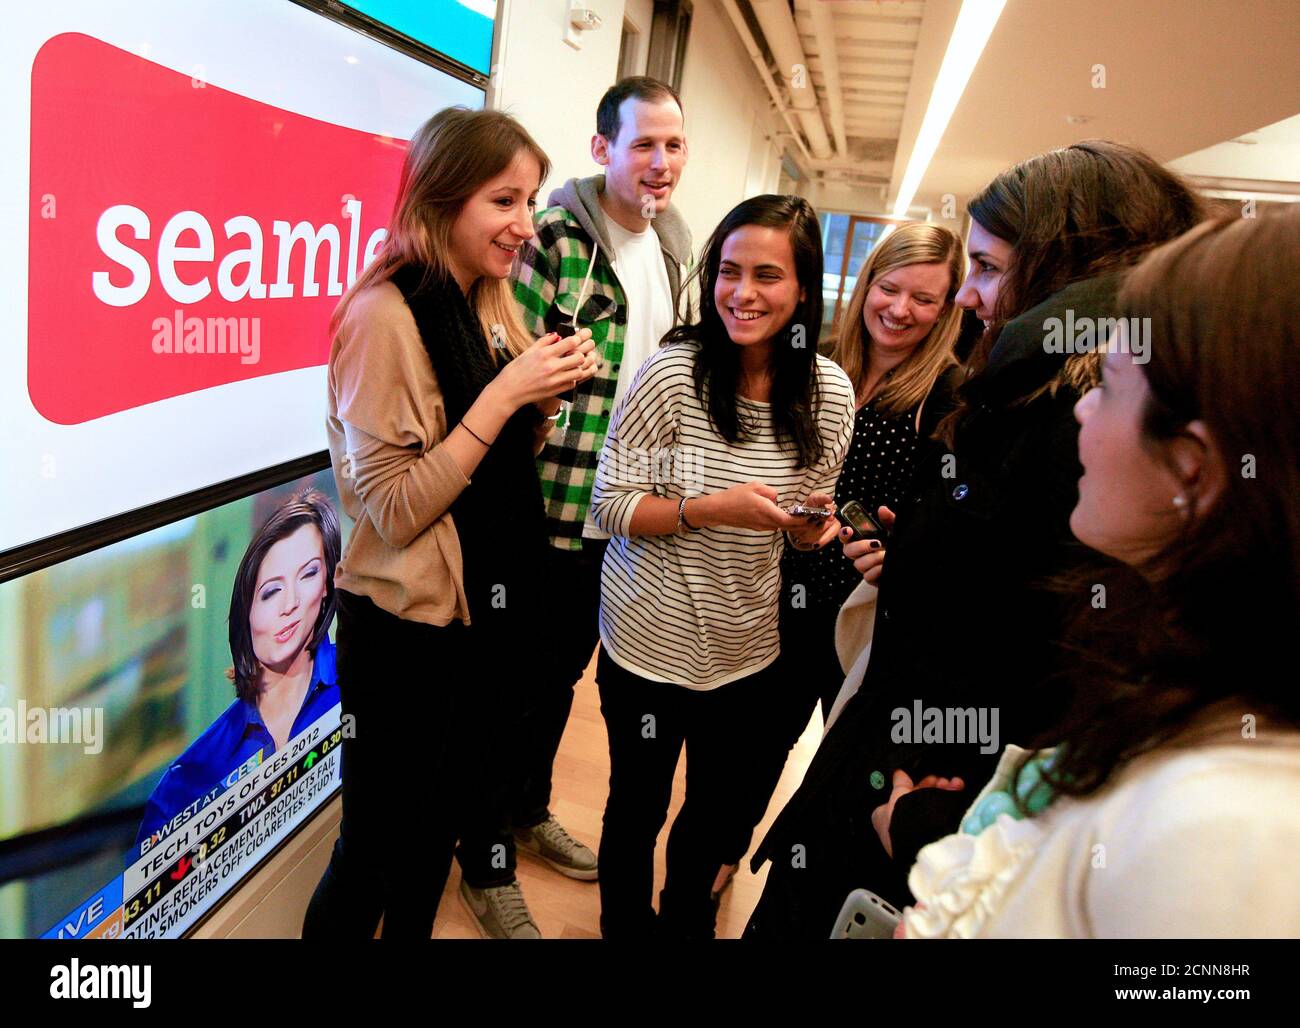 Staff from Seamless gather at their offices in New York January 10, 2012. Seamless, the online delivery service, is partnered with restaurants in over 30 major cities across the U.S. and Britain.  REUTERS/Brendan McDermid (UNITED STATES - Tags: BUSINESS FOOD) Stock Photo